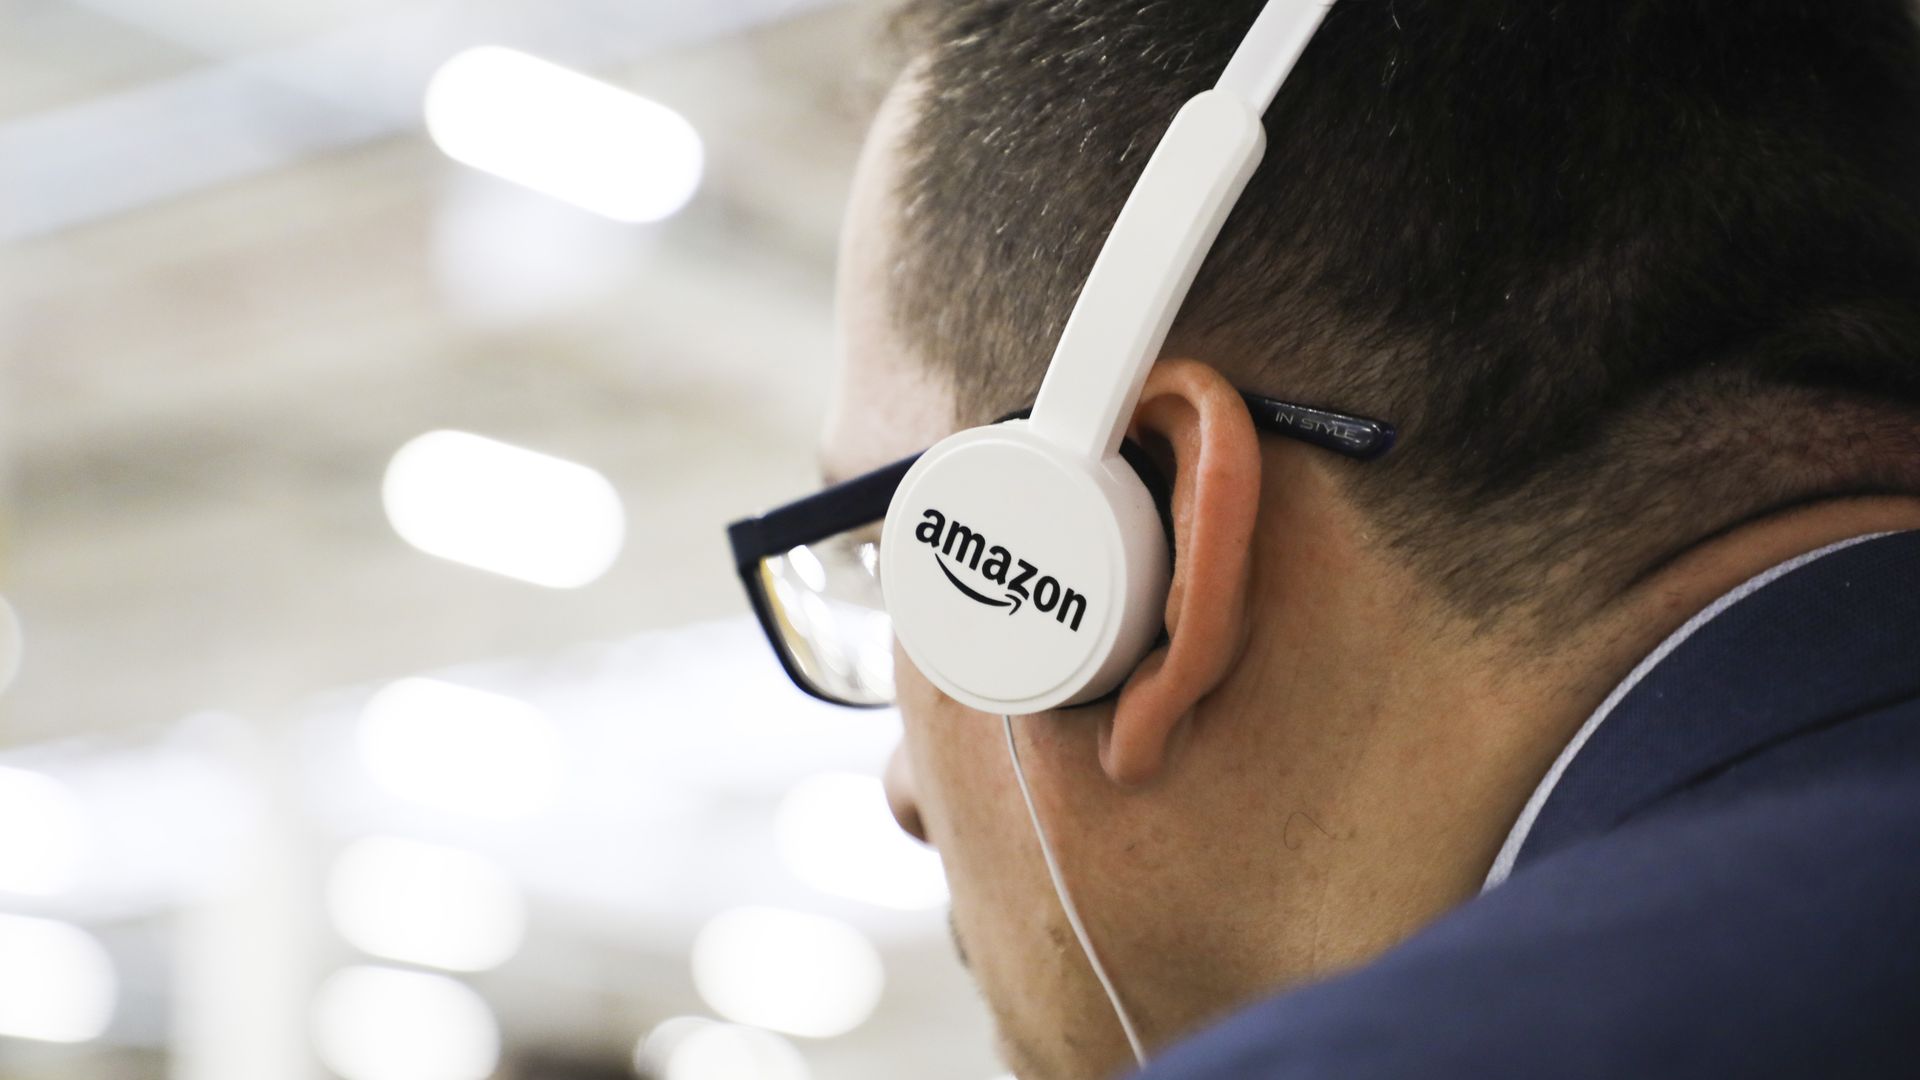 In this image, a man wears headphones with the Amazon logo.